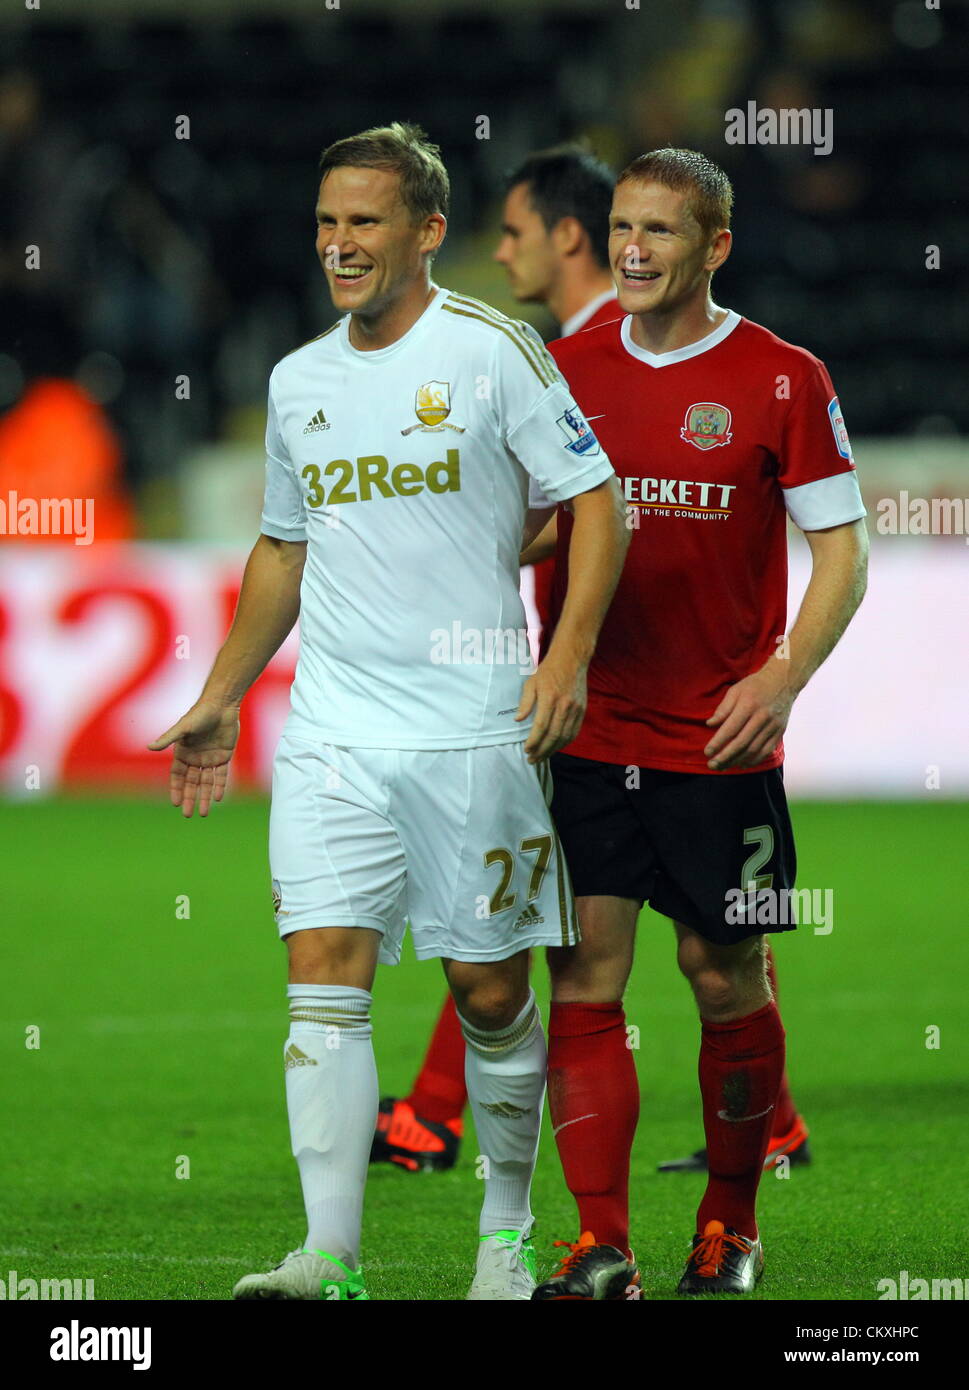 Pictured L-R: Mark Gower of Swansea and Bobby Hassell of Barnsley. Tuesday 28 August 2012  Re: Capital One Cup game, Swansea City FC v Barnsley at the Liberty Stadium, south Wales. Stock Photo